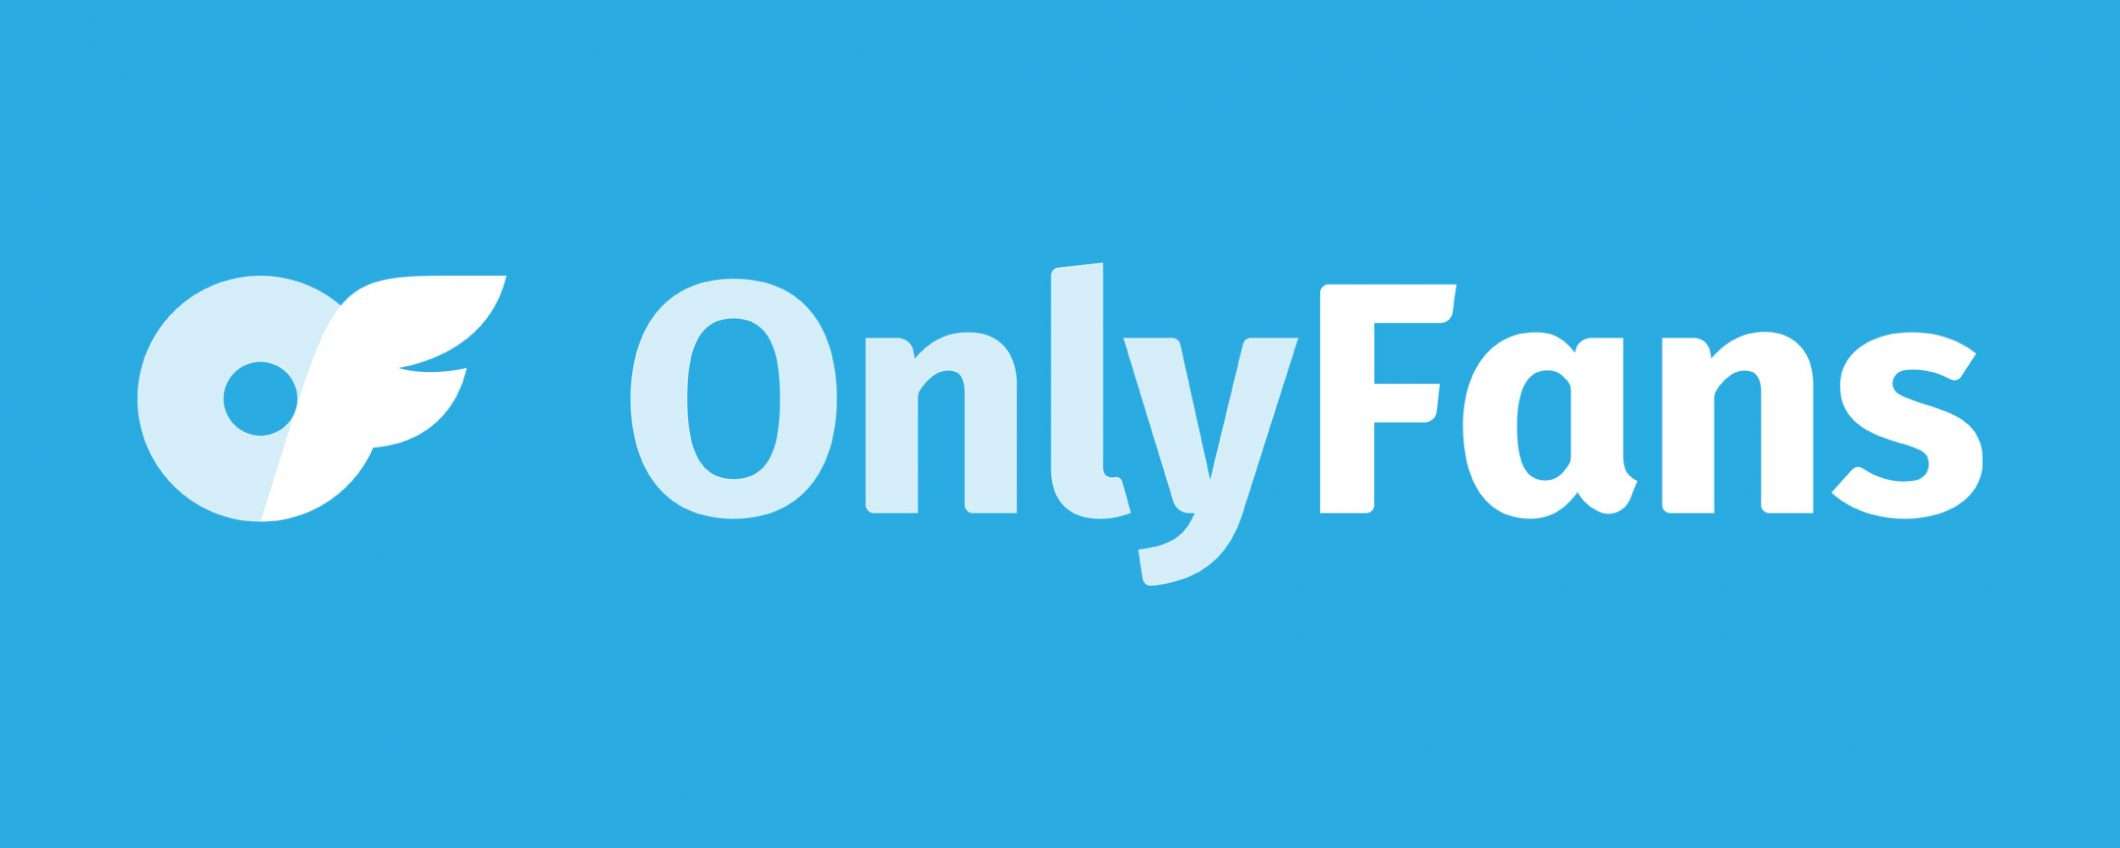 OnlyFans cambia CEO: Tim Stokely lascia ad Ami Gan